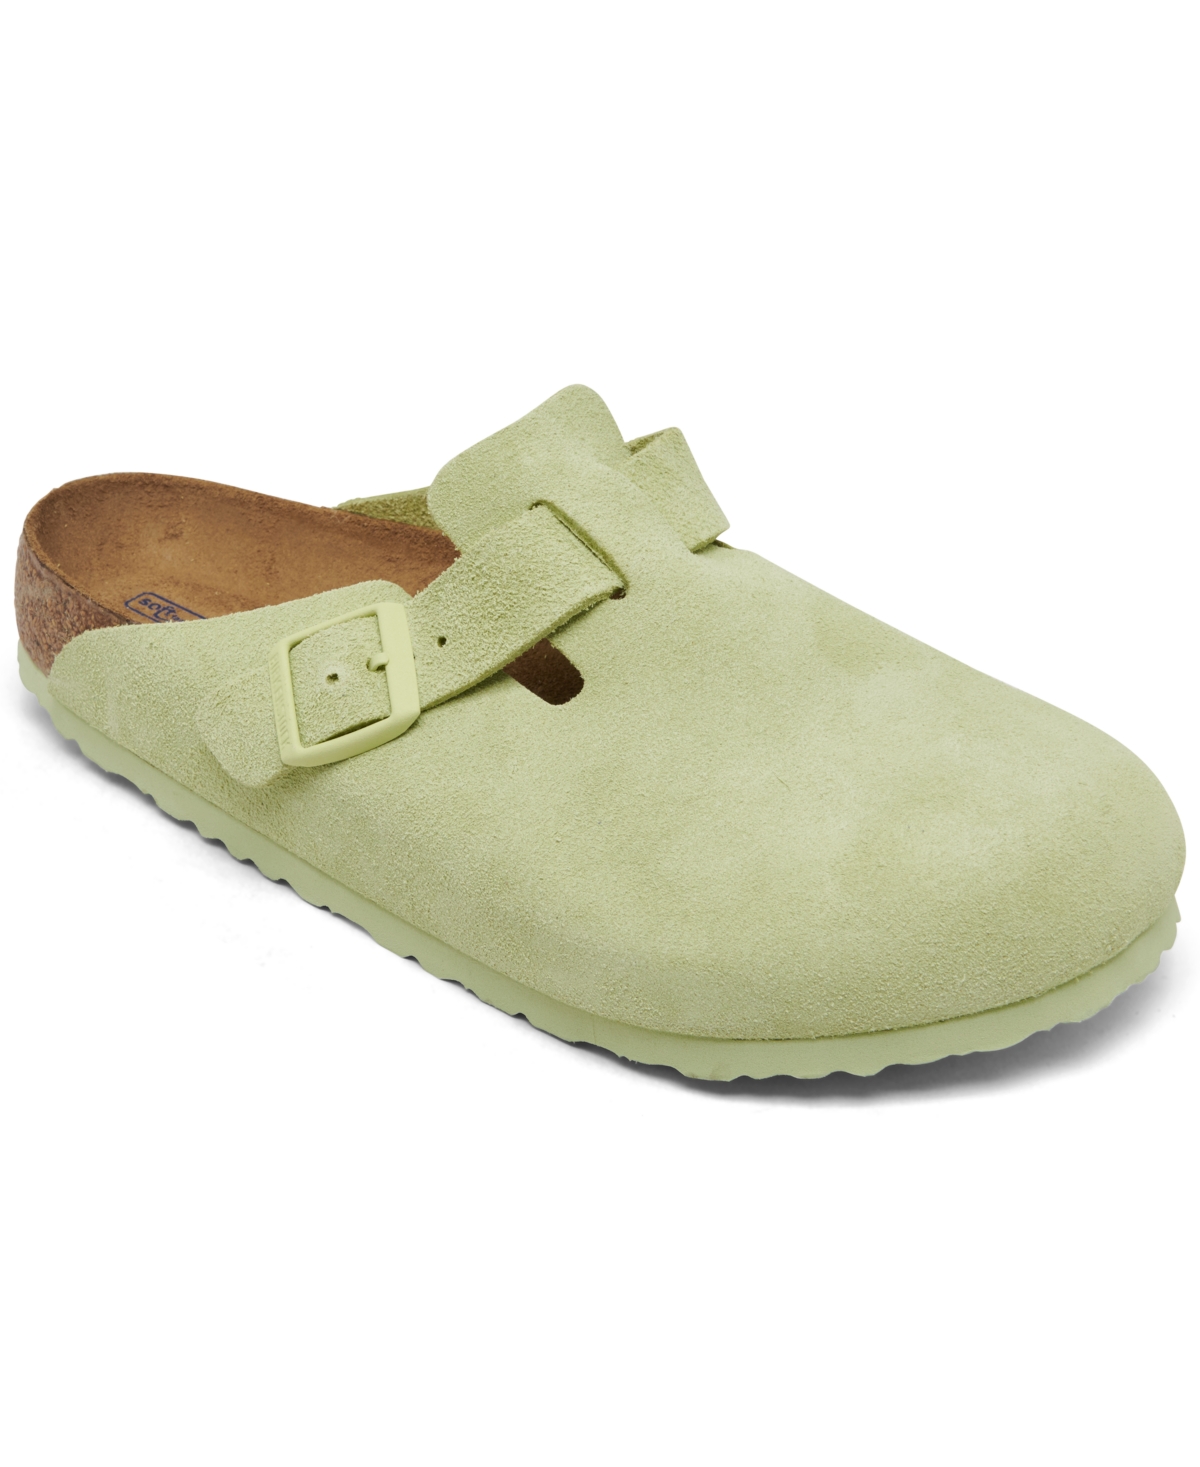 Men's Boston Soft Footbed Suede Leather Clogs from Finish Line - White